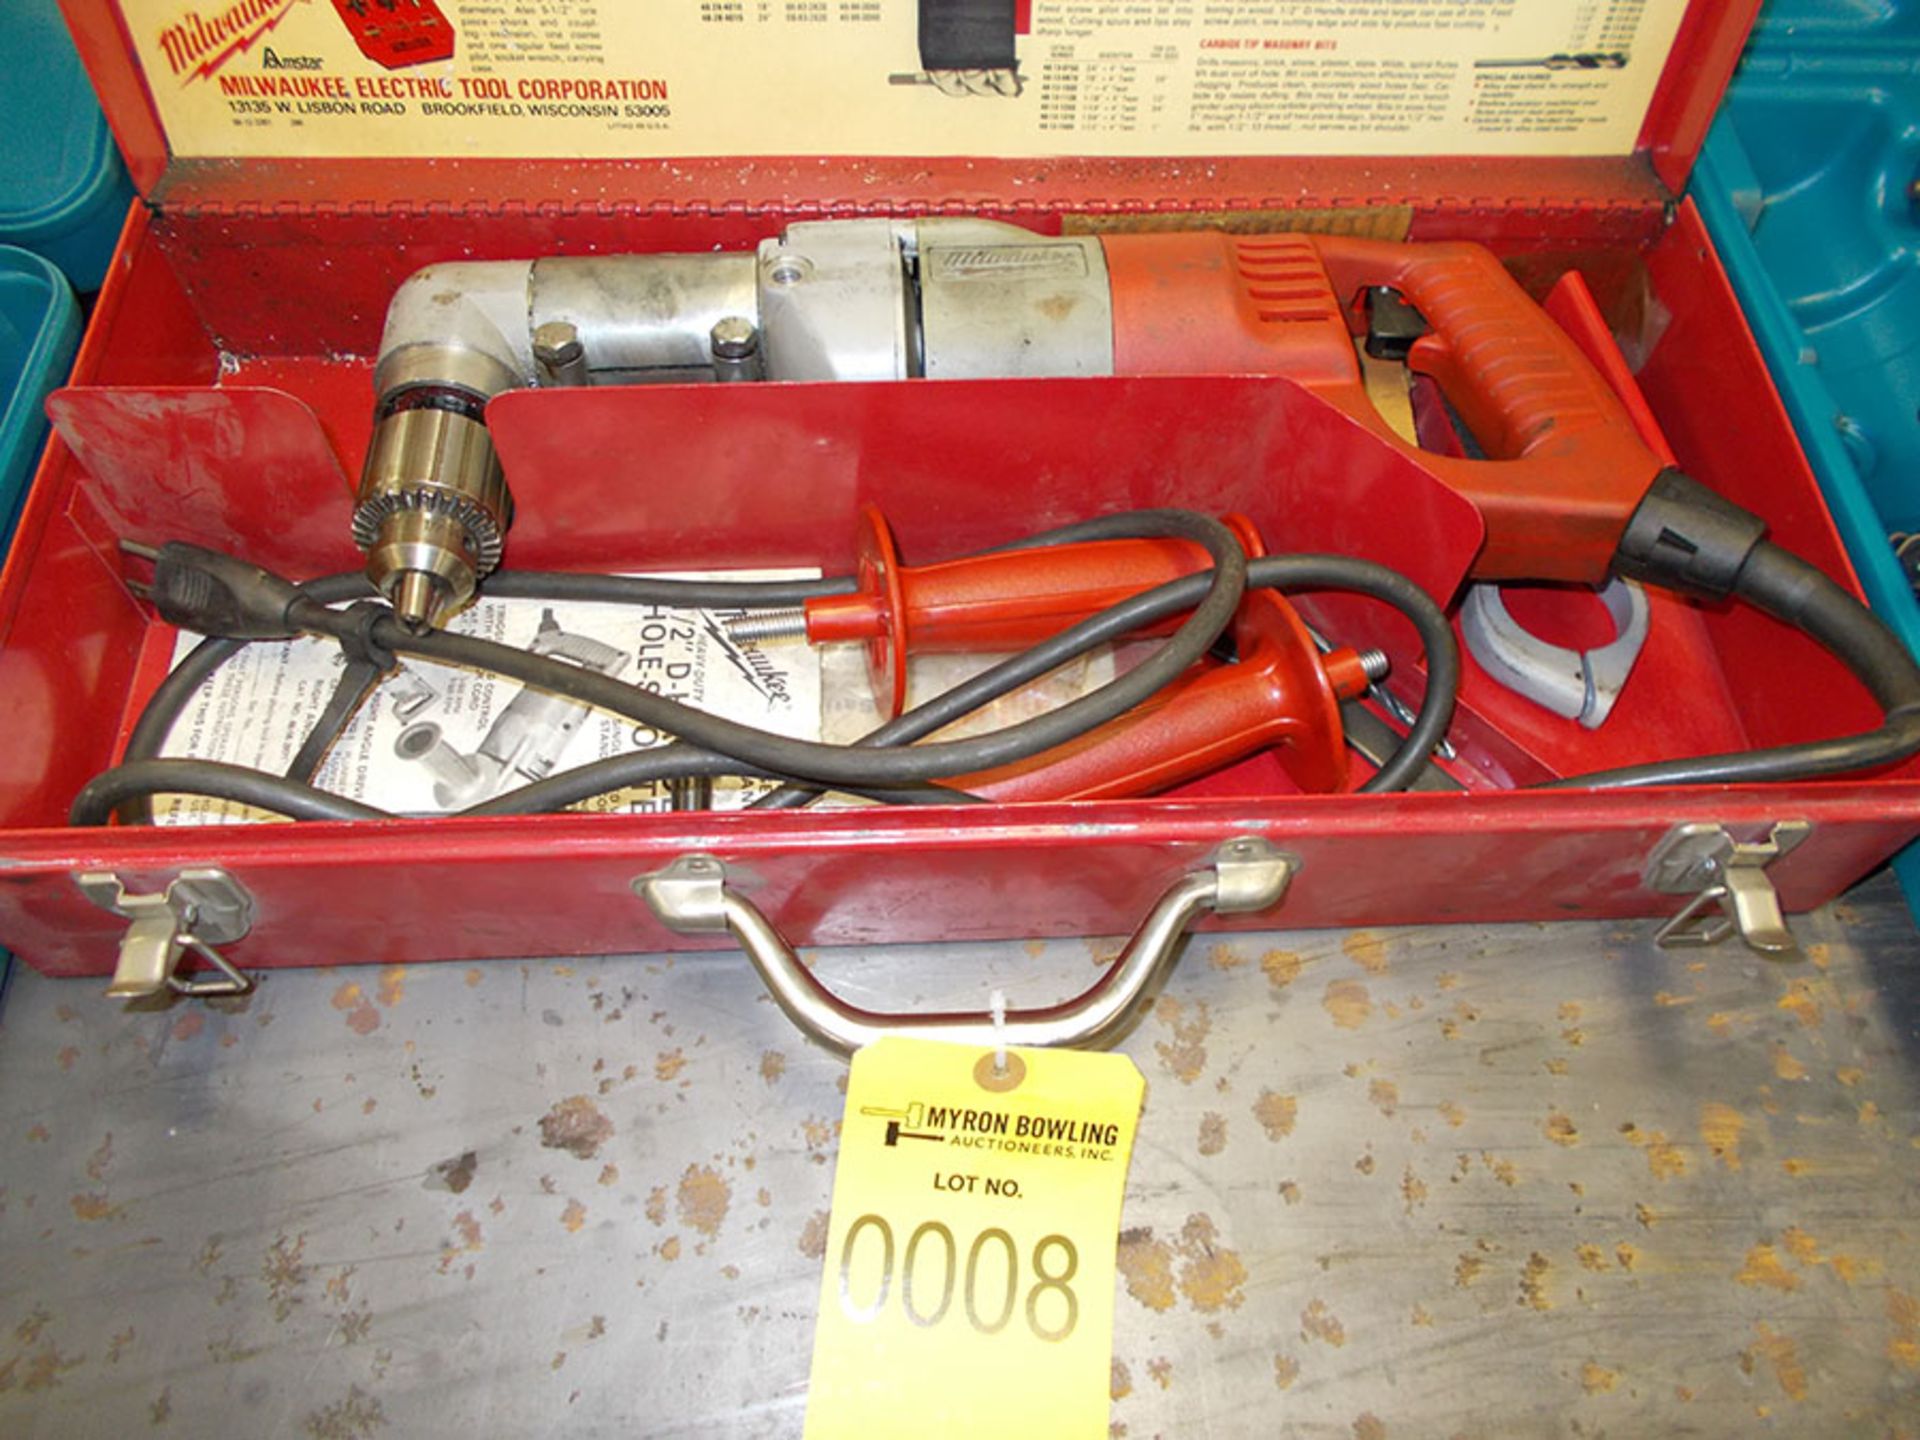 MILWAUKEE 1/2'' RIGHT ANGLE DRILL; 120V, CAT# 1107-1, S/N 629A394160306